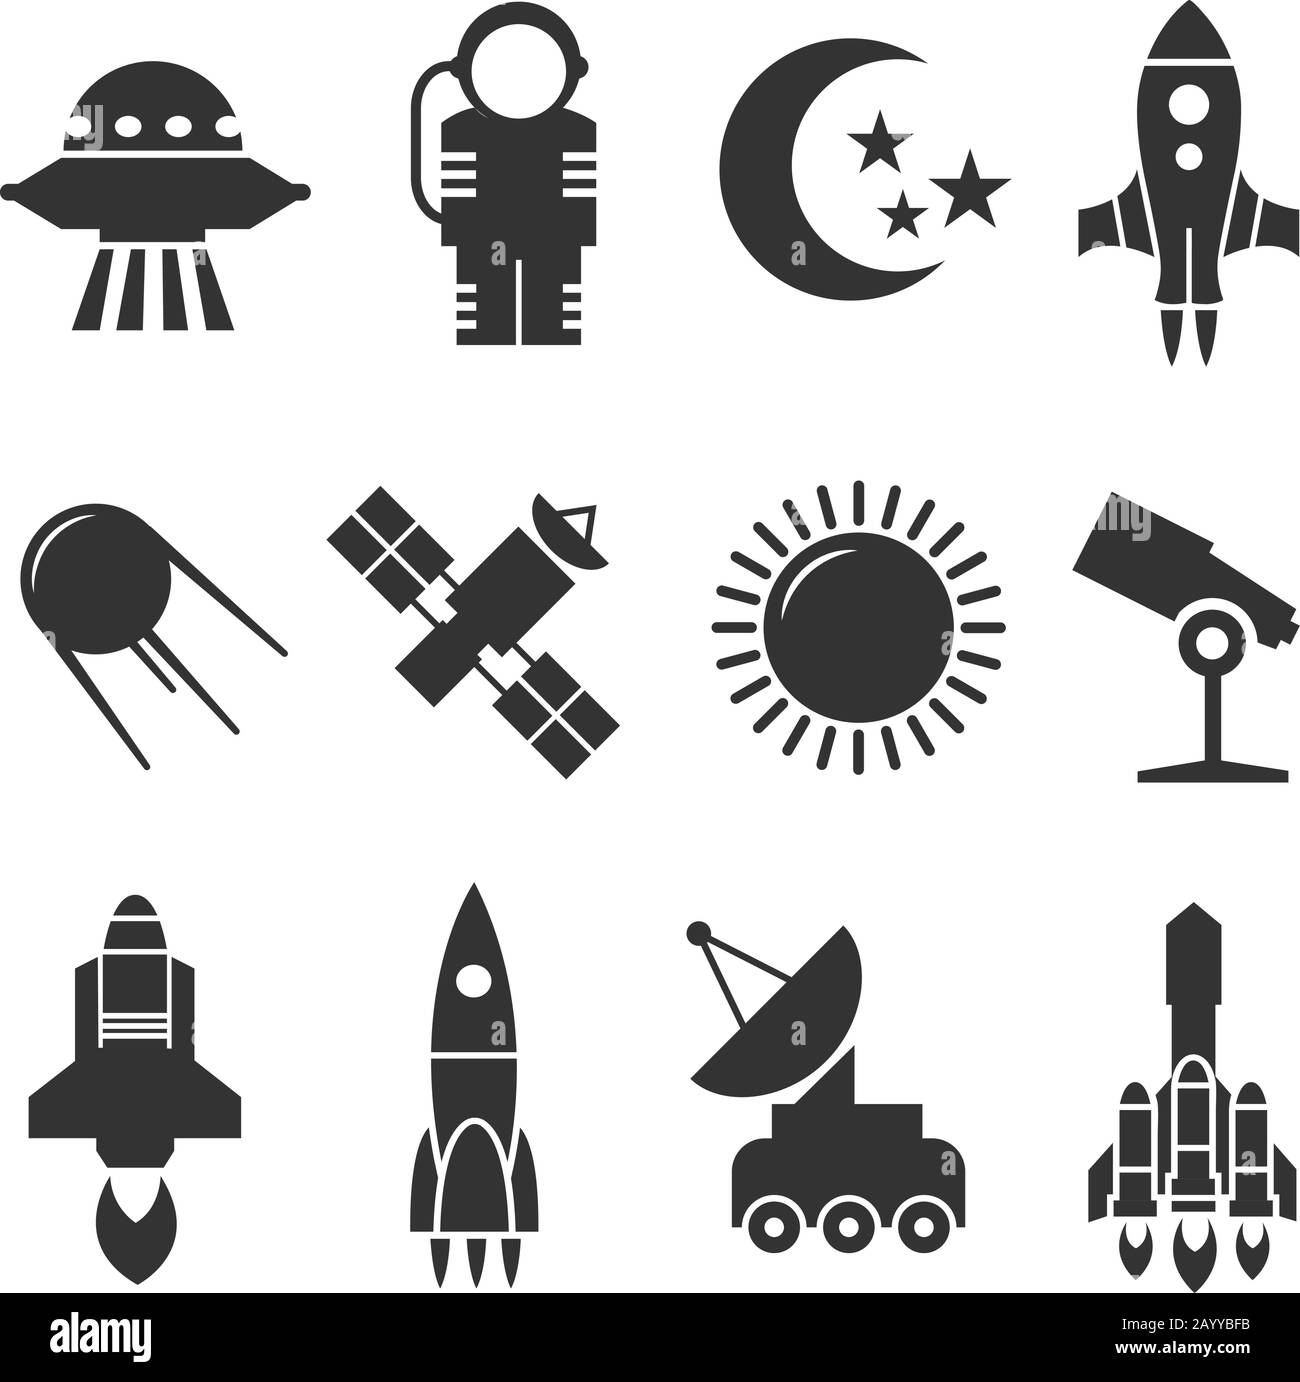 Space and astronomy vector icons. Rockets and satellites, planets and astronaut vector signs Stock Vector